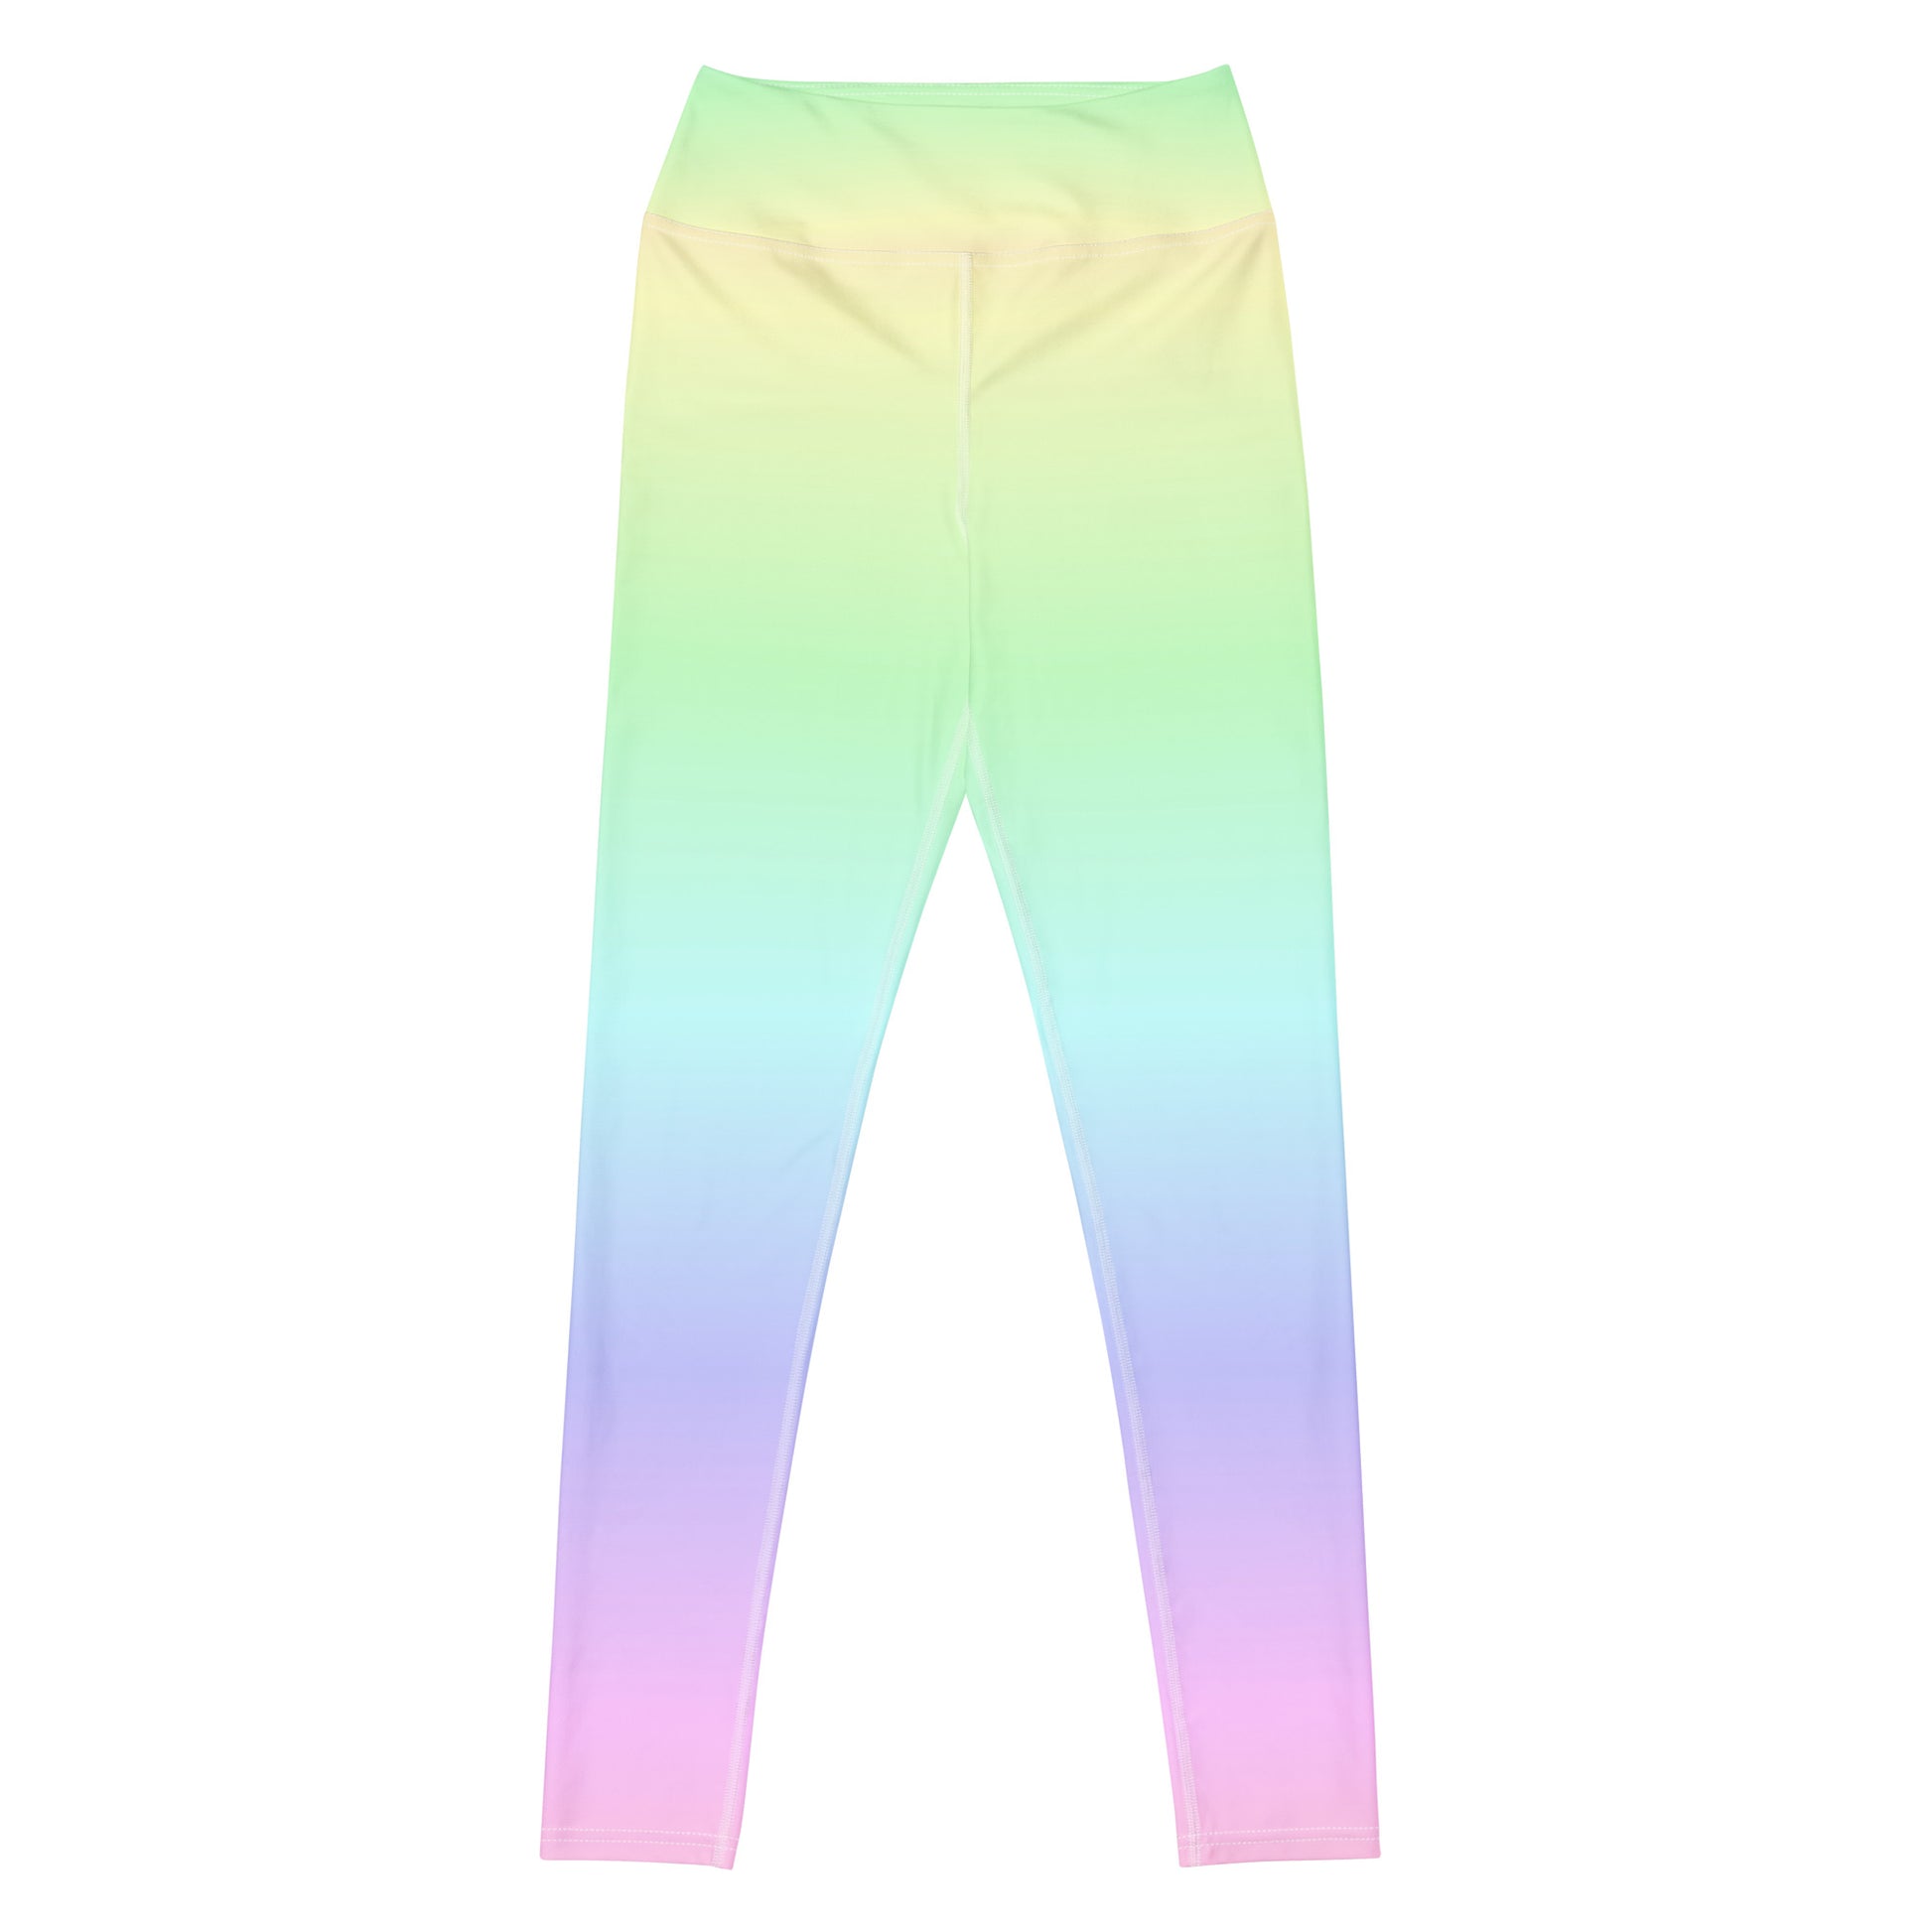 Pastel Rainbow Ombre Yoga Leggings Women, Tie Dye Gradient Kawaii Colorful High Waisted Pants Cute Printed Workout Gym Designer Tights Starcove Fashion